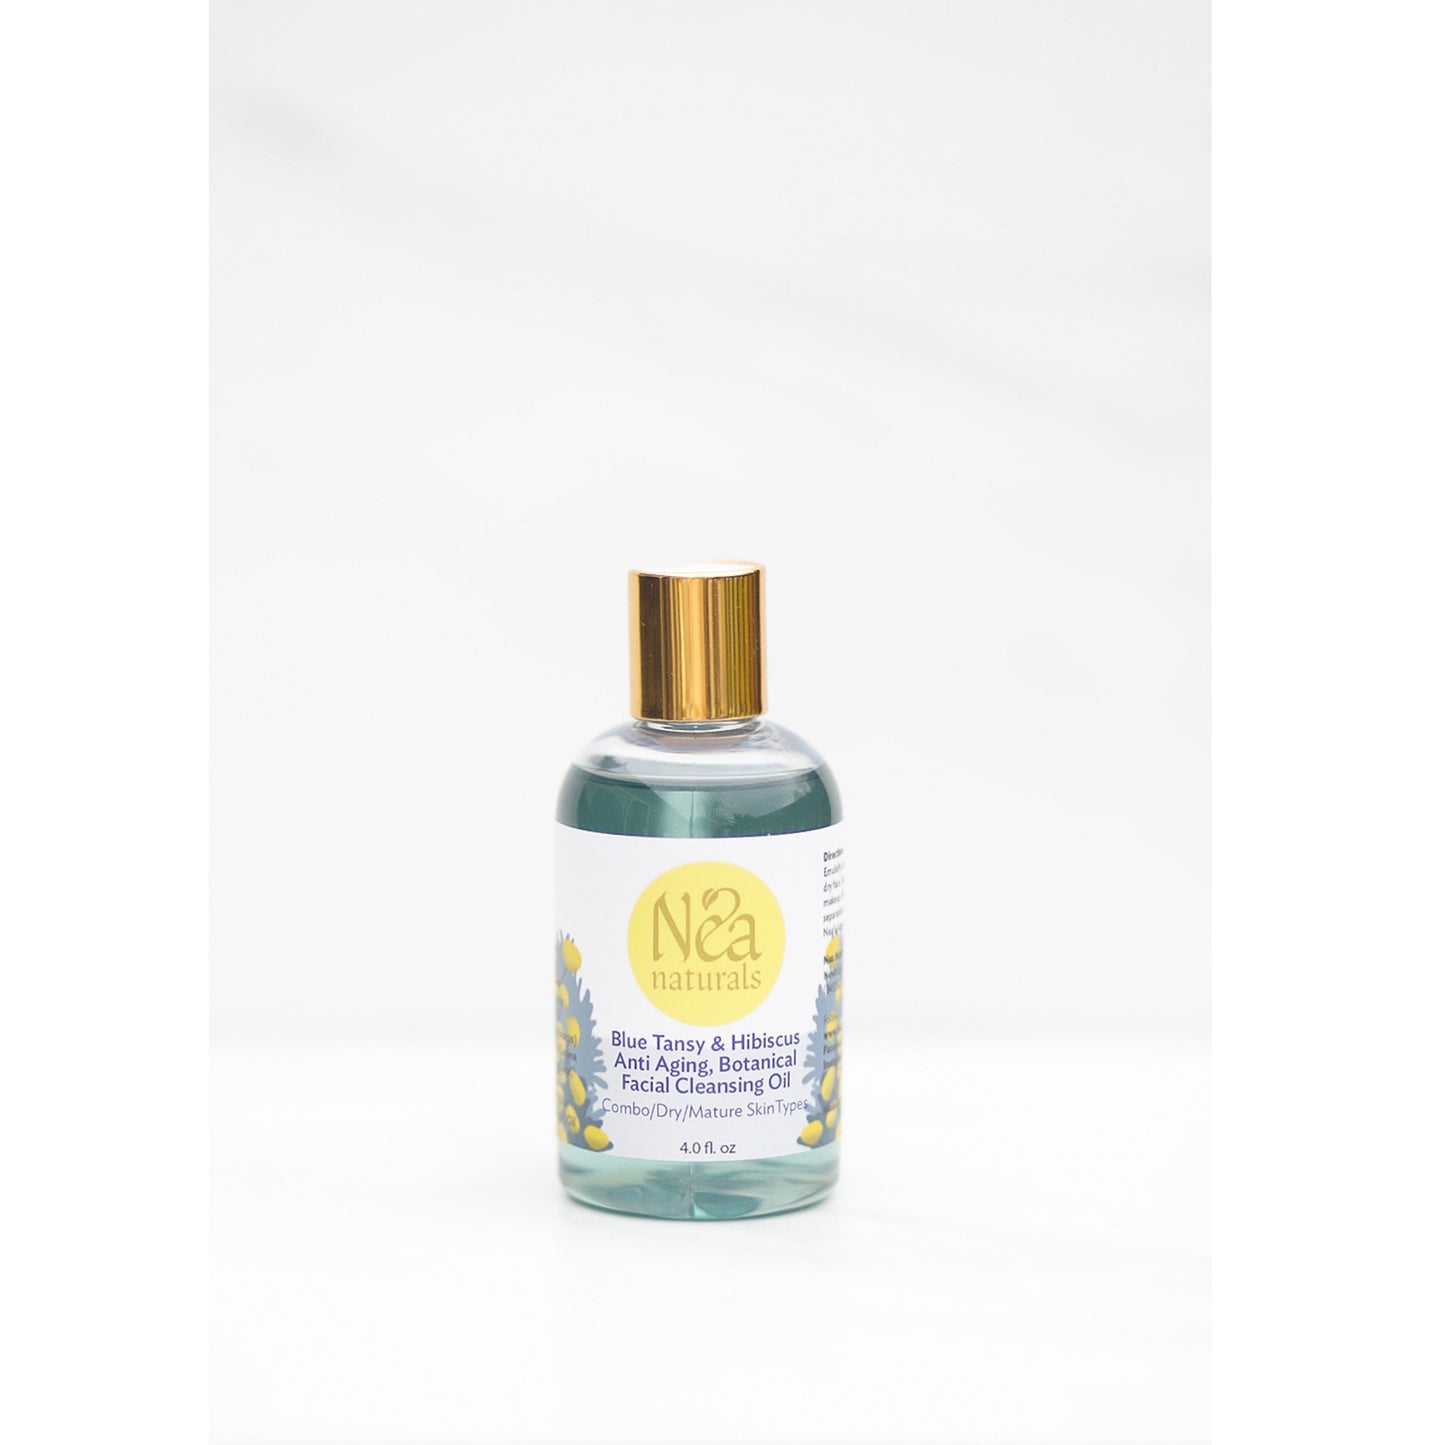 Blue Tansy & Organic Hibiscus Anti-Aging Botanical Facial Cleansing Oil